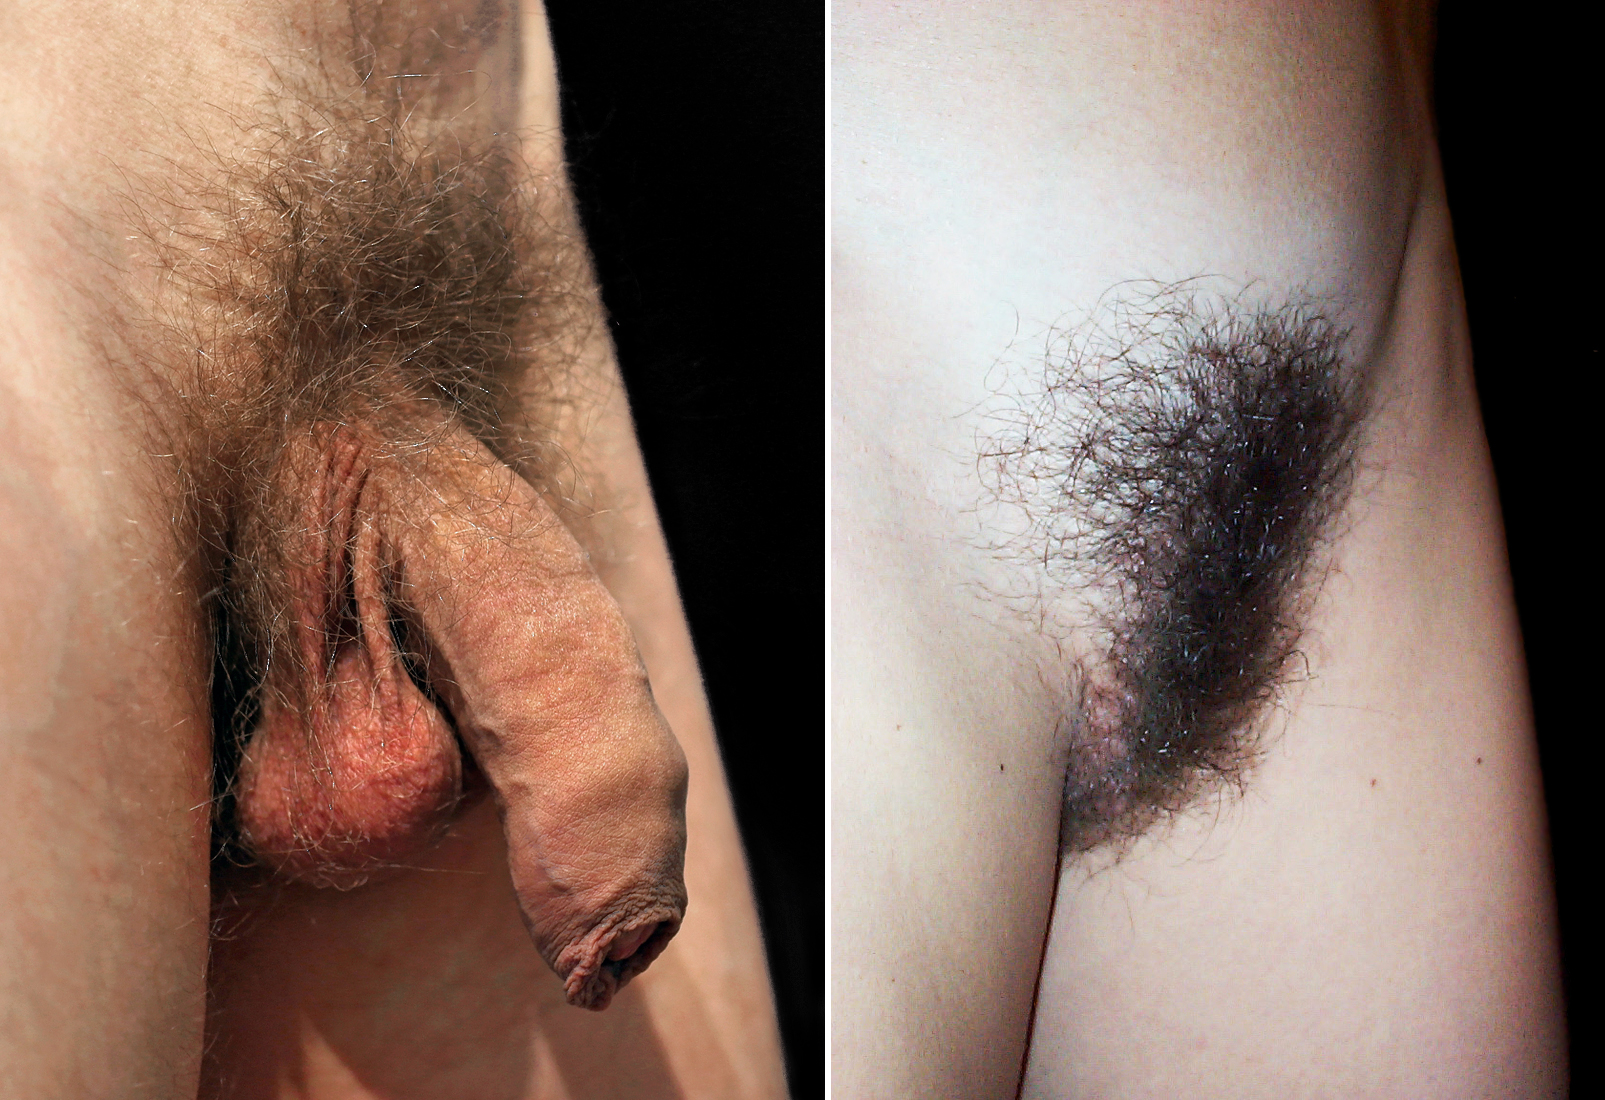 Naked with pubic hair